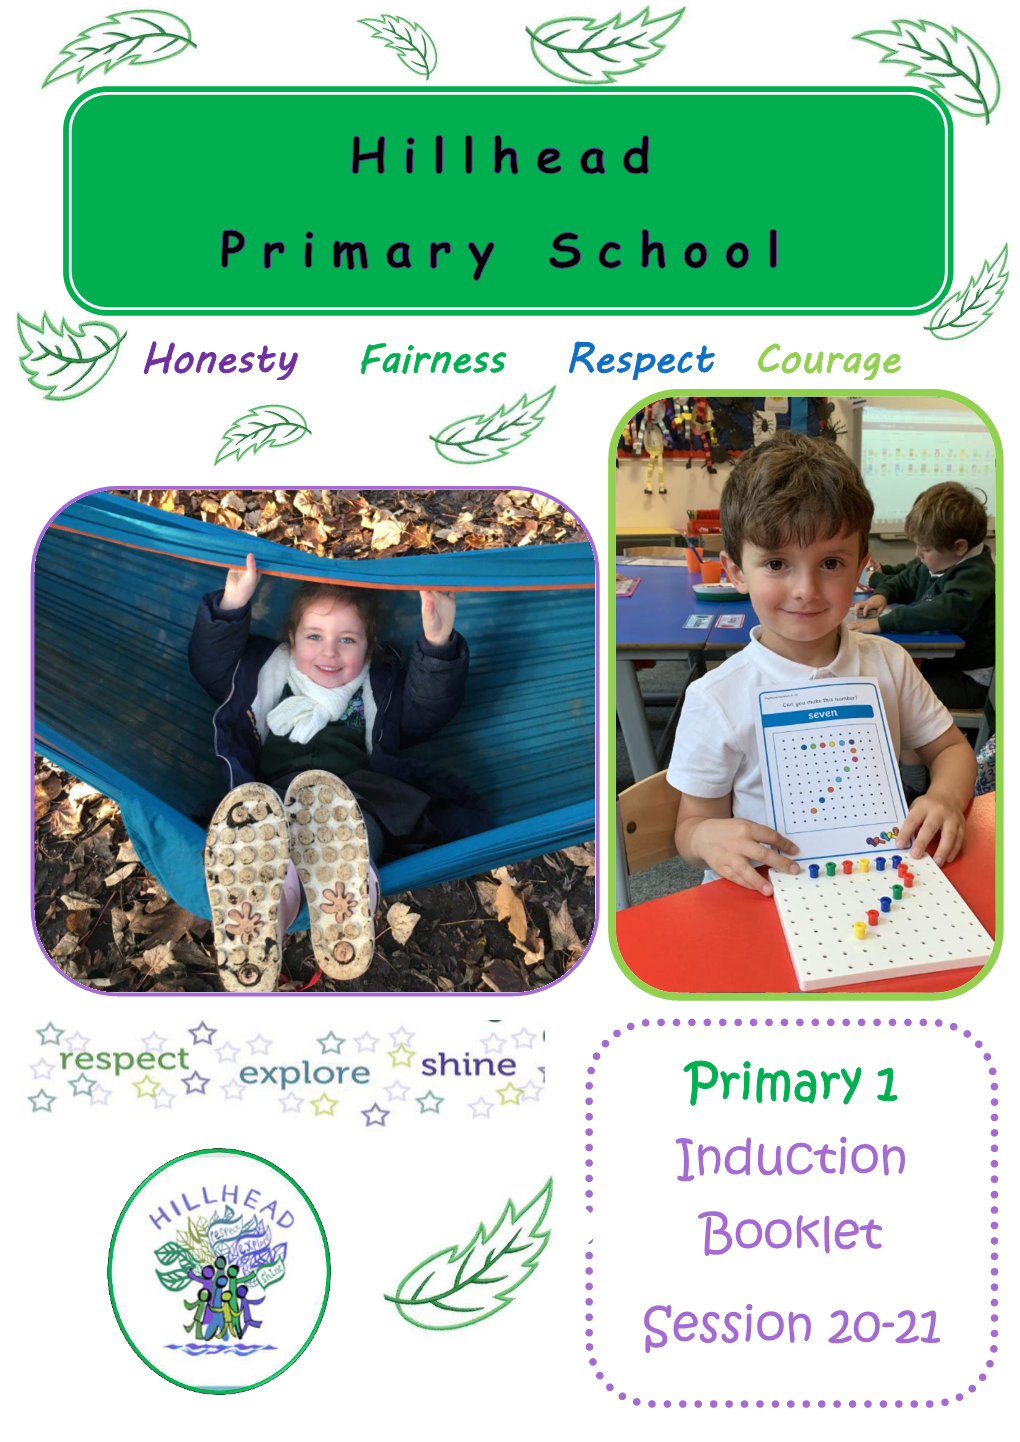 Primary 1 Induction Booklet Session 20-21